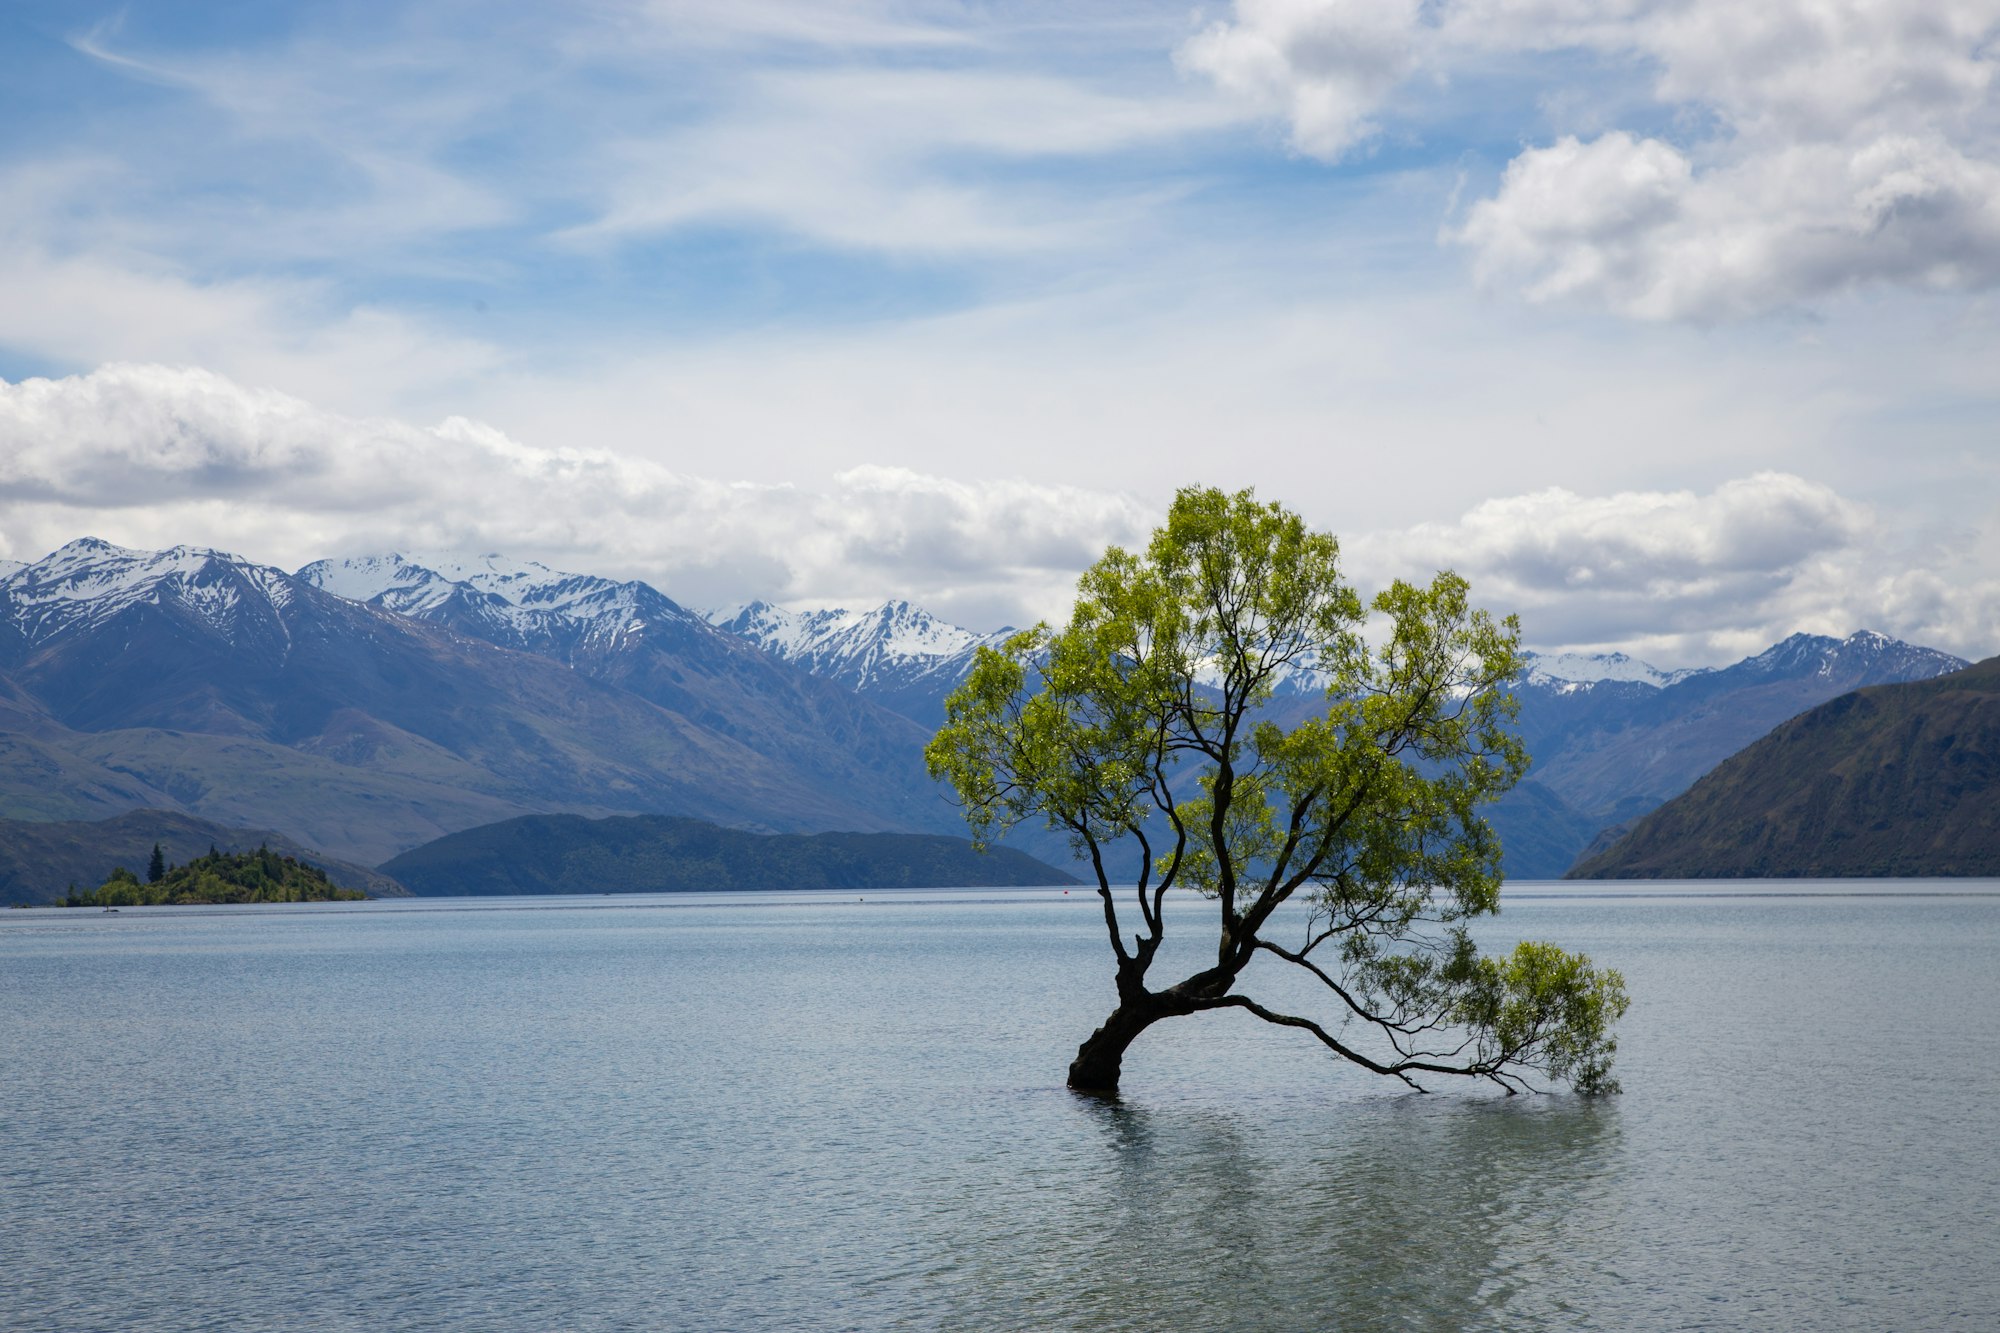 A tree in a lake in a park with mountains in the background